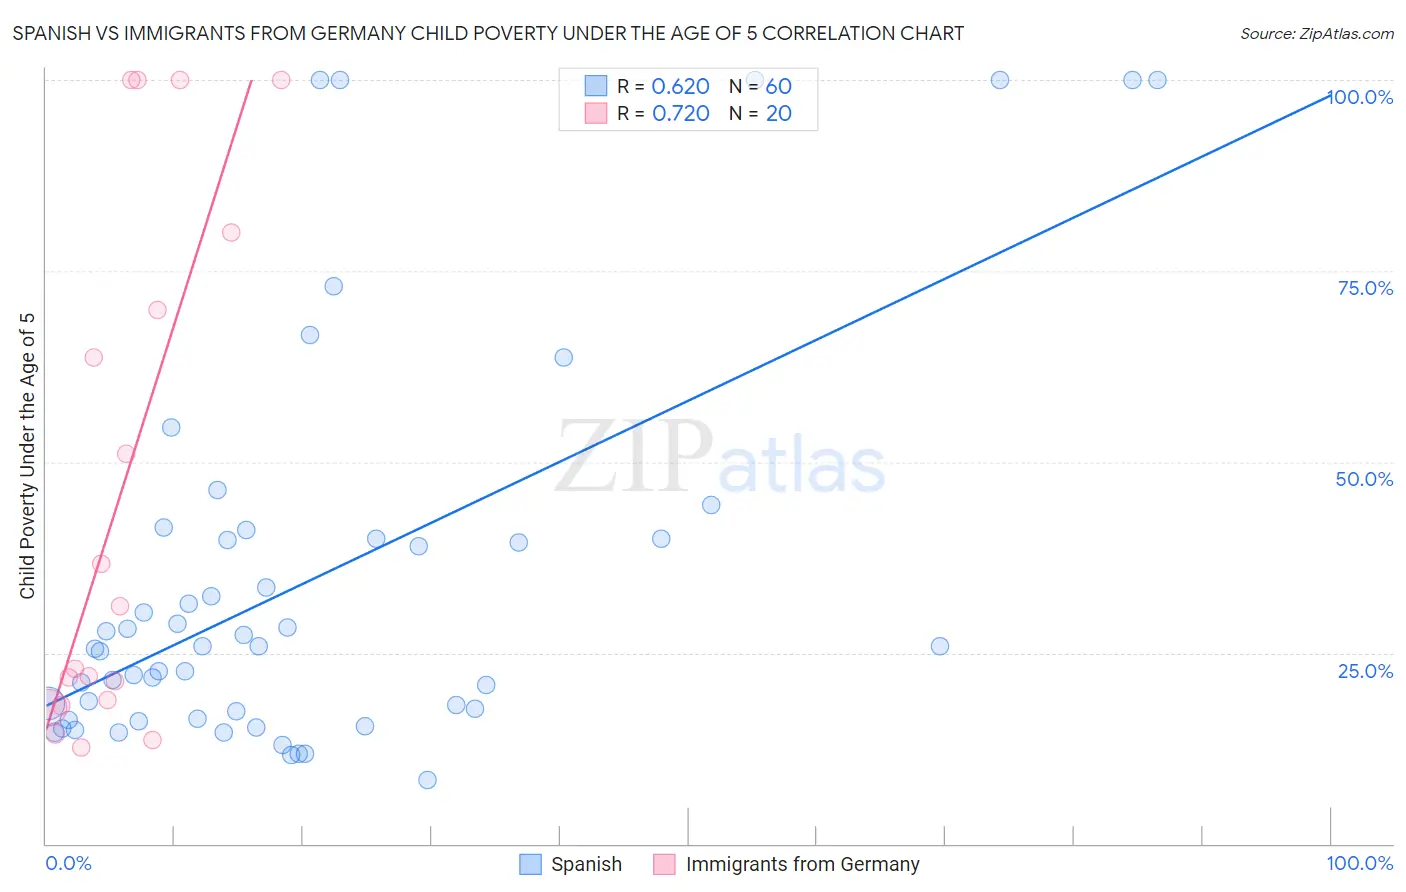 Spanish vs Immigrants from Germany Child Poverty Under the Age of 5